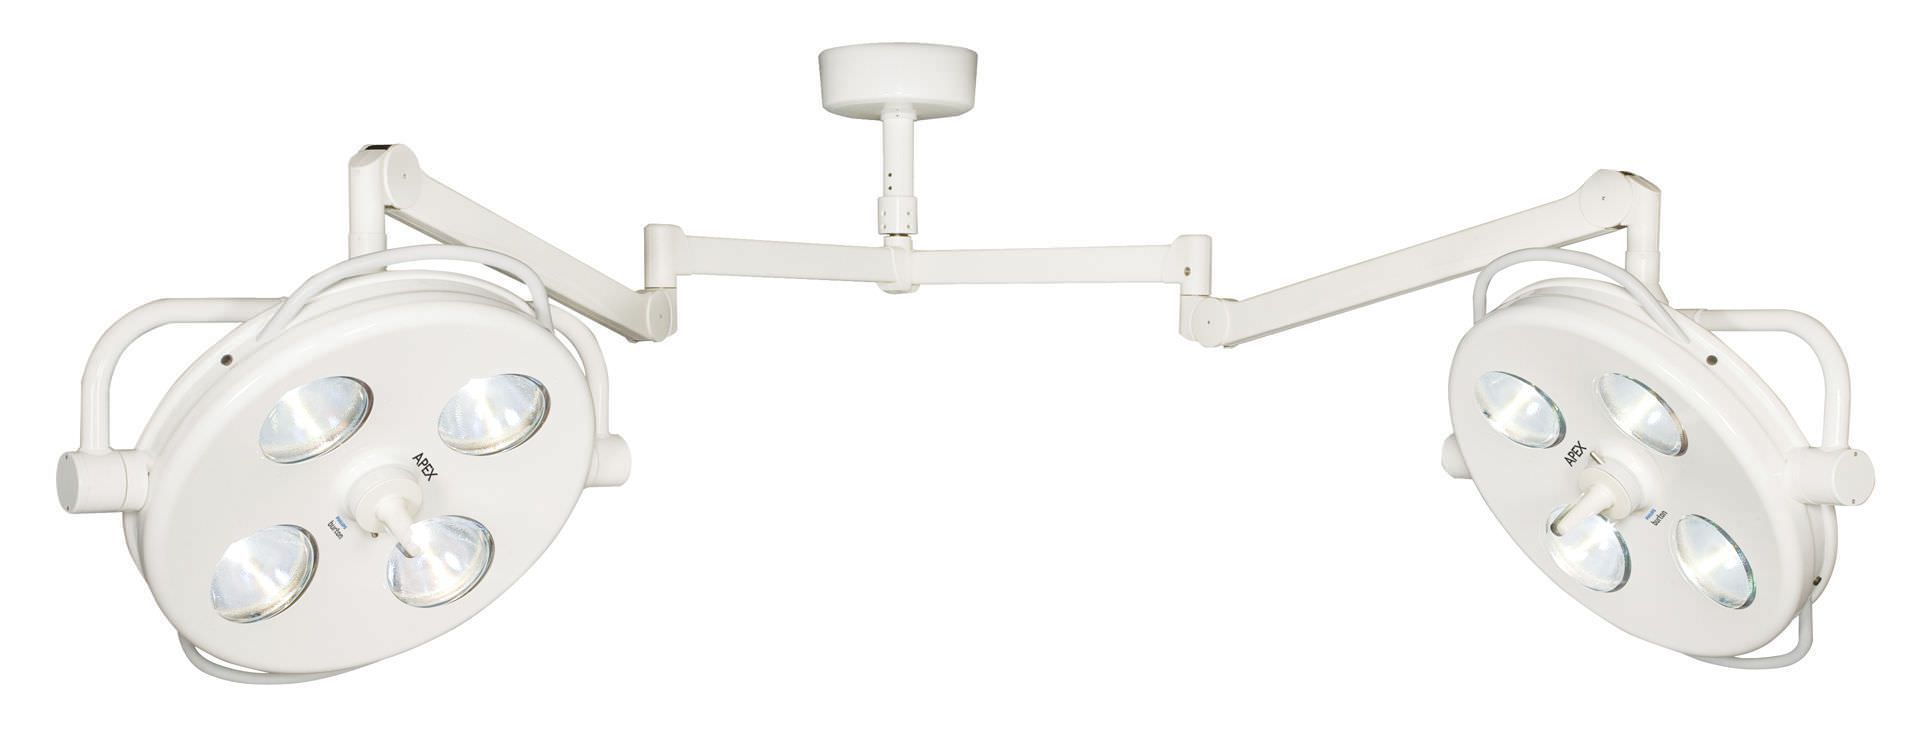 Halogen surgical light / ceiling-mounted / 2-arm 2 x 120 000 lux @ 1 m | APEX Burton Medical